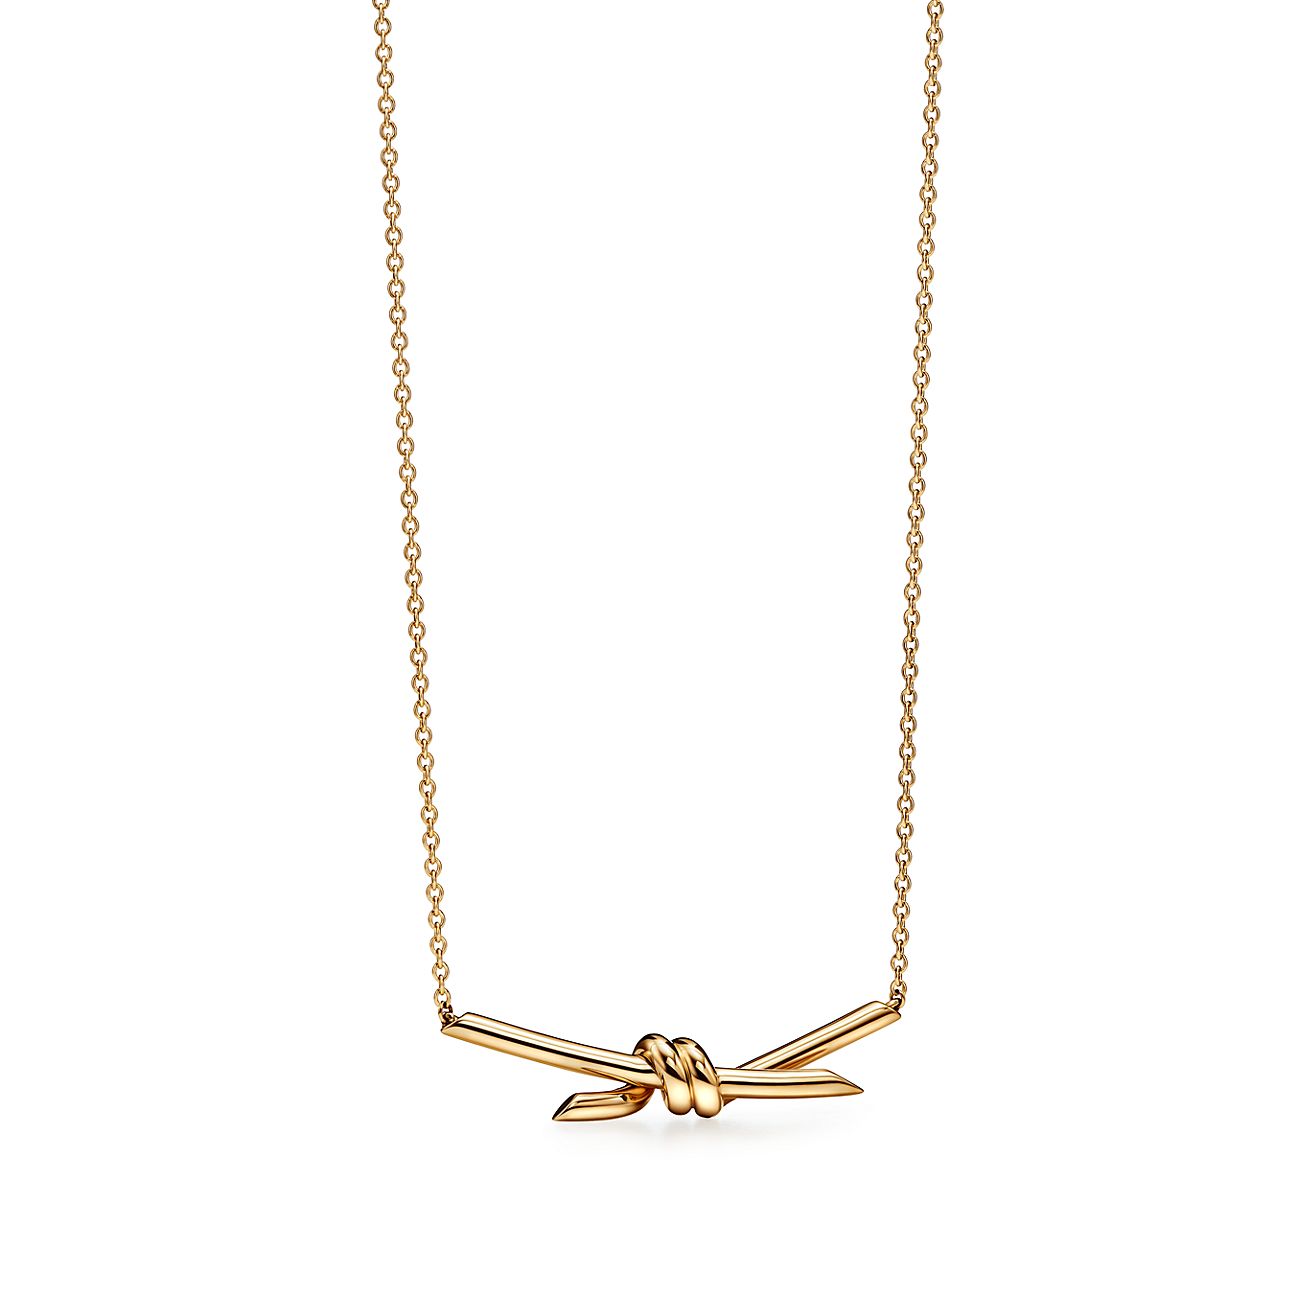 Tiffany KnotPendant in Yellow Gold